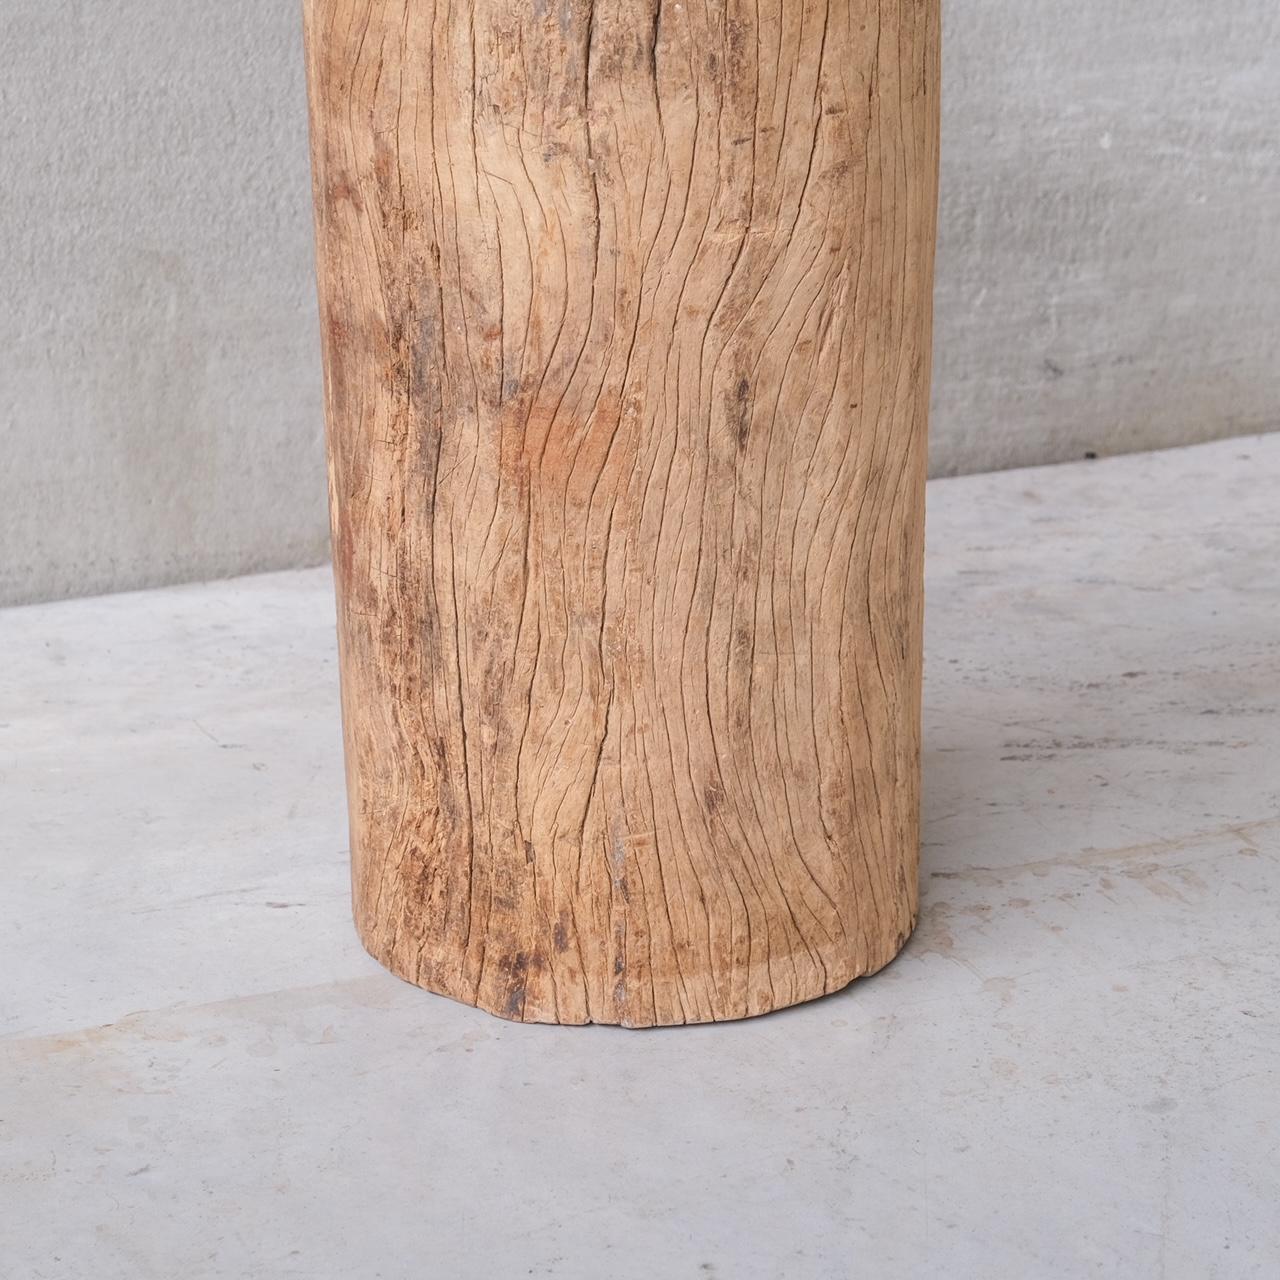 Primitive Solid Wooden Wabi-Sabi Pedestal or Side Table In Good Condition For Sale In London, GB